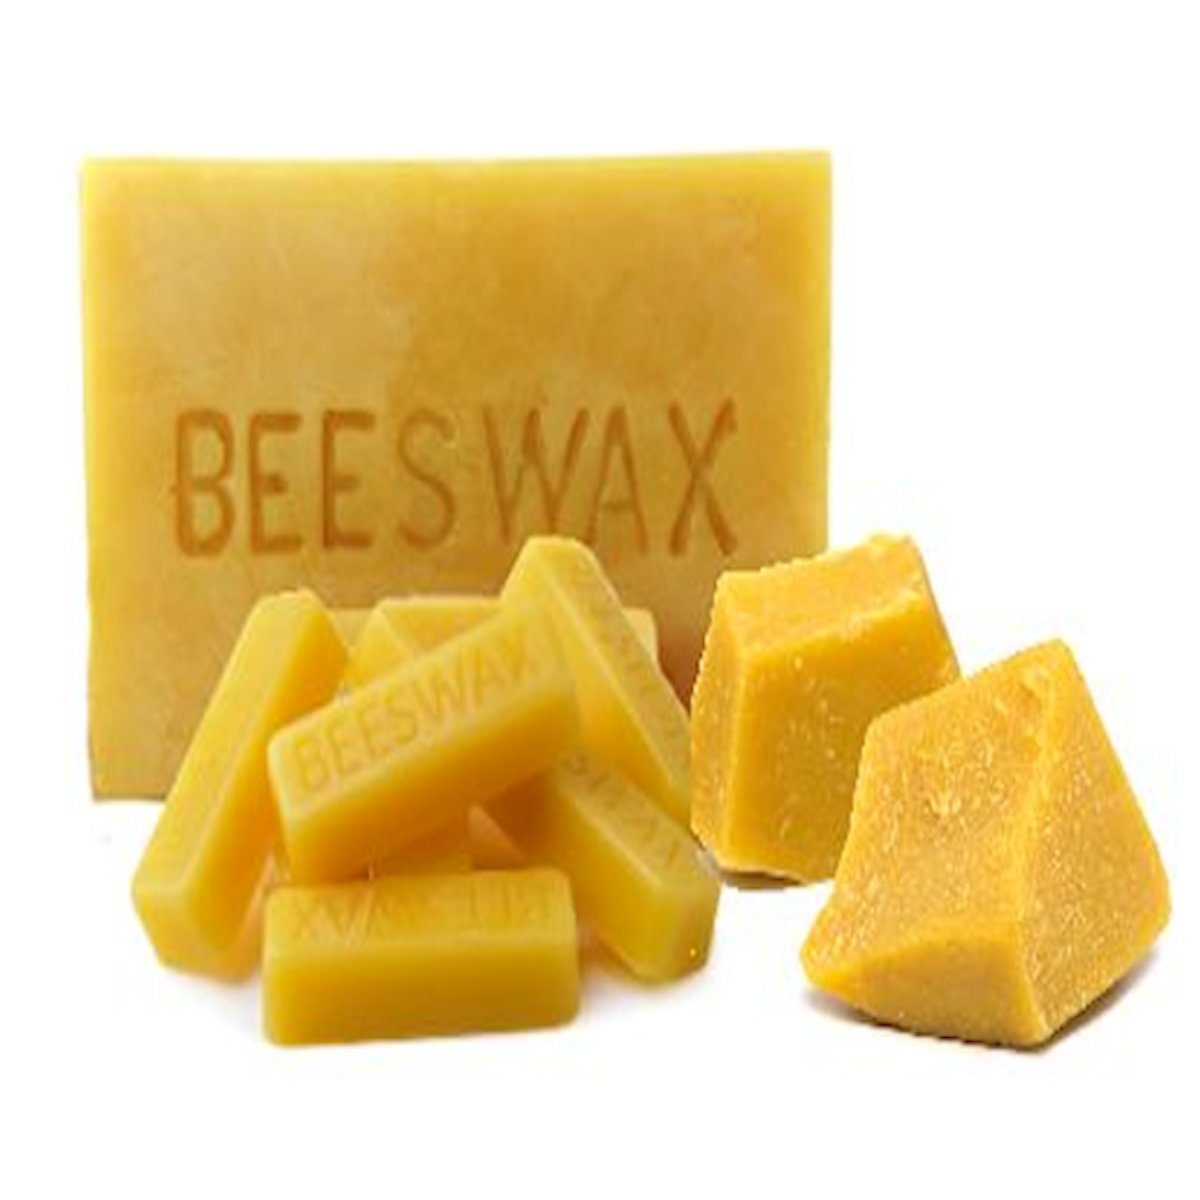 Wholesale bulk beeswax for candle making For Rejuvenating Your